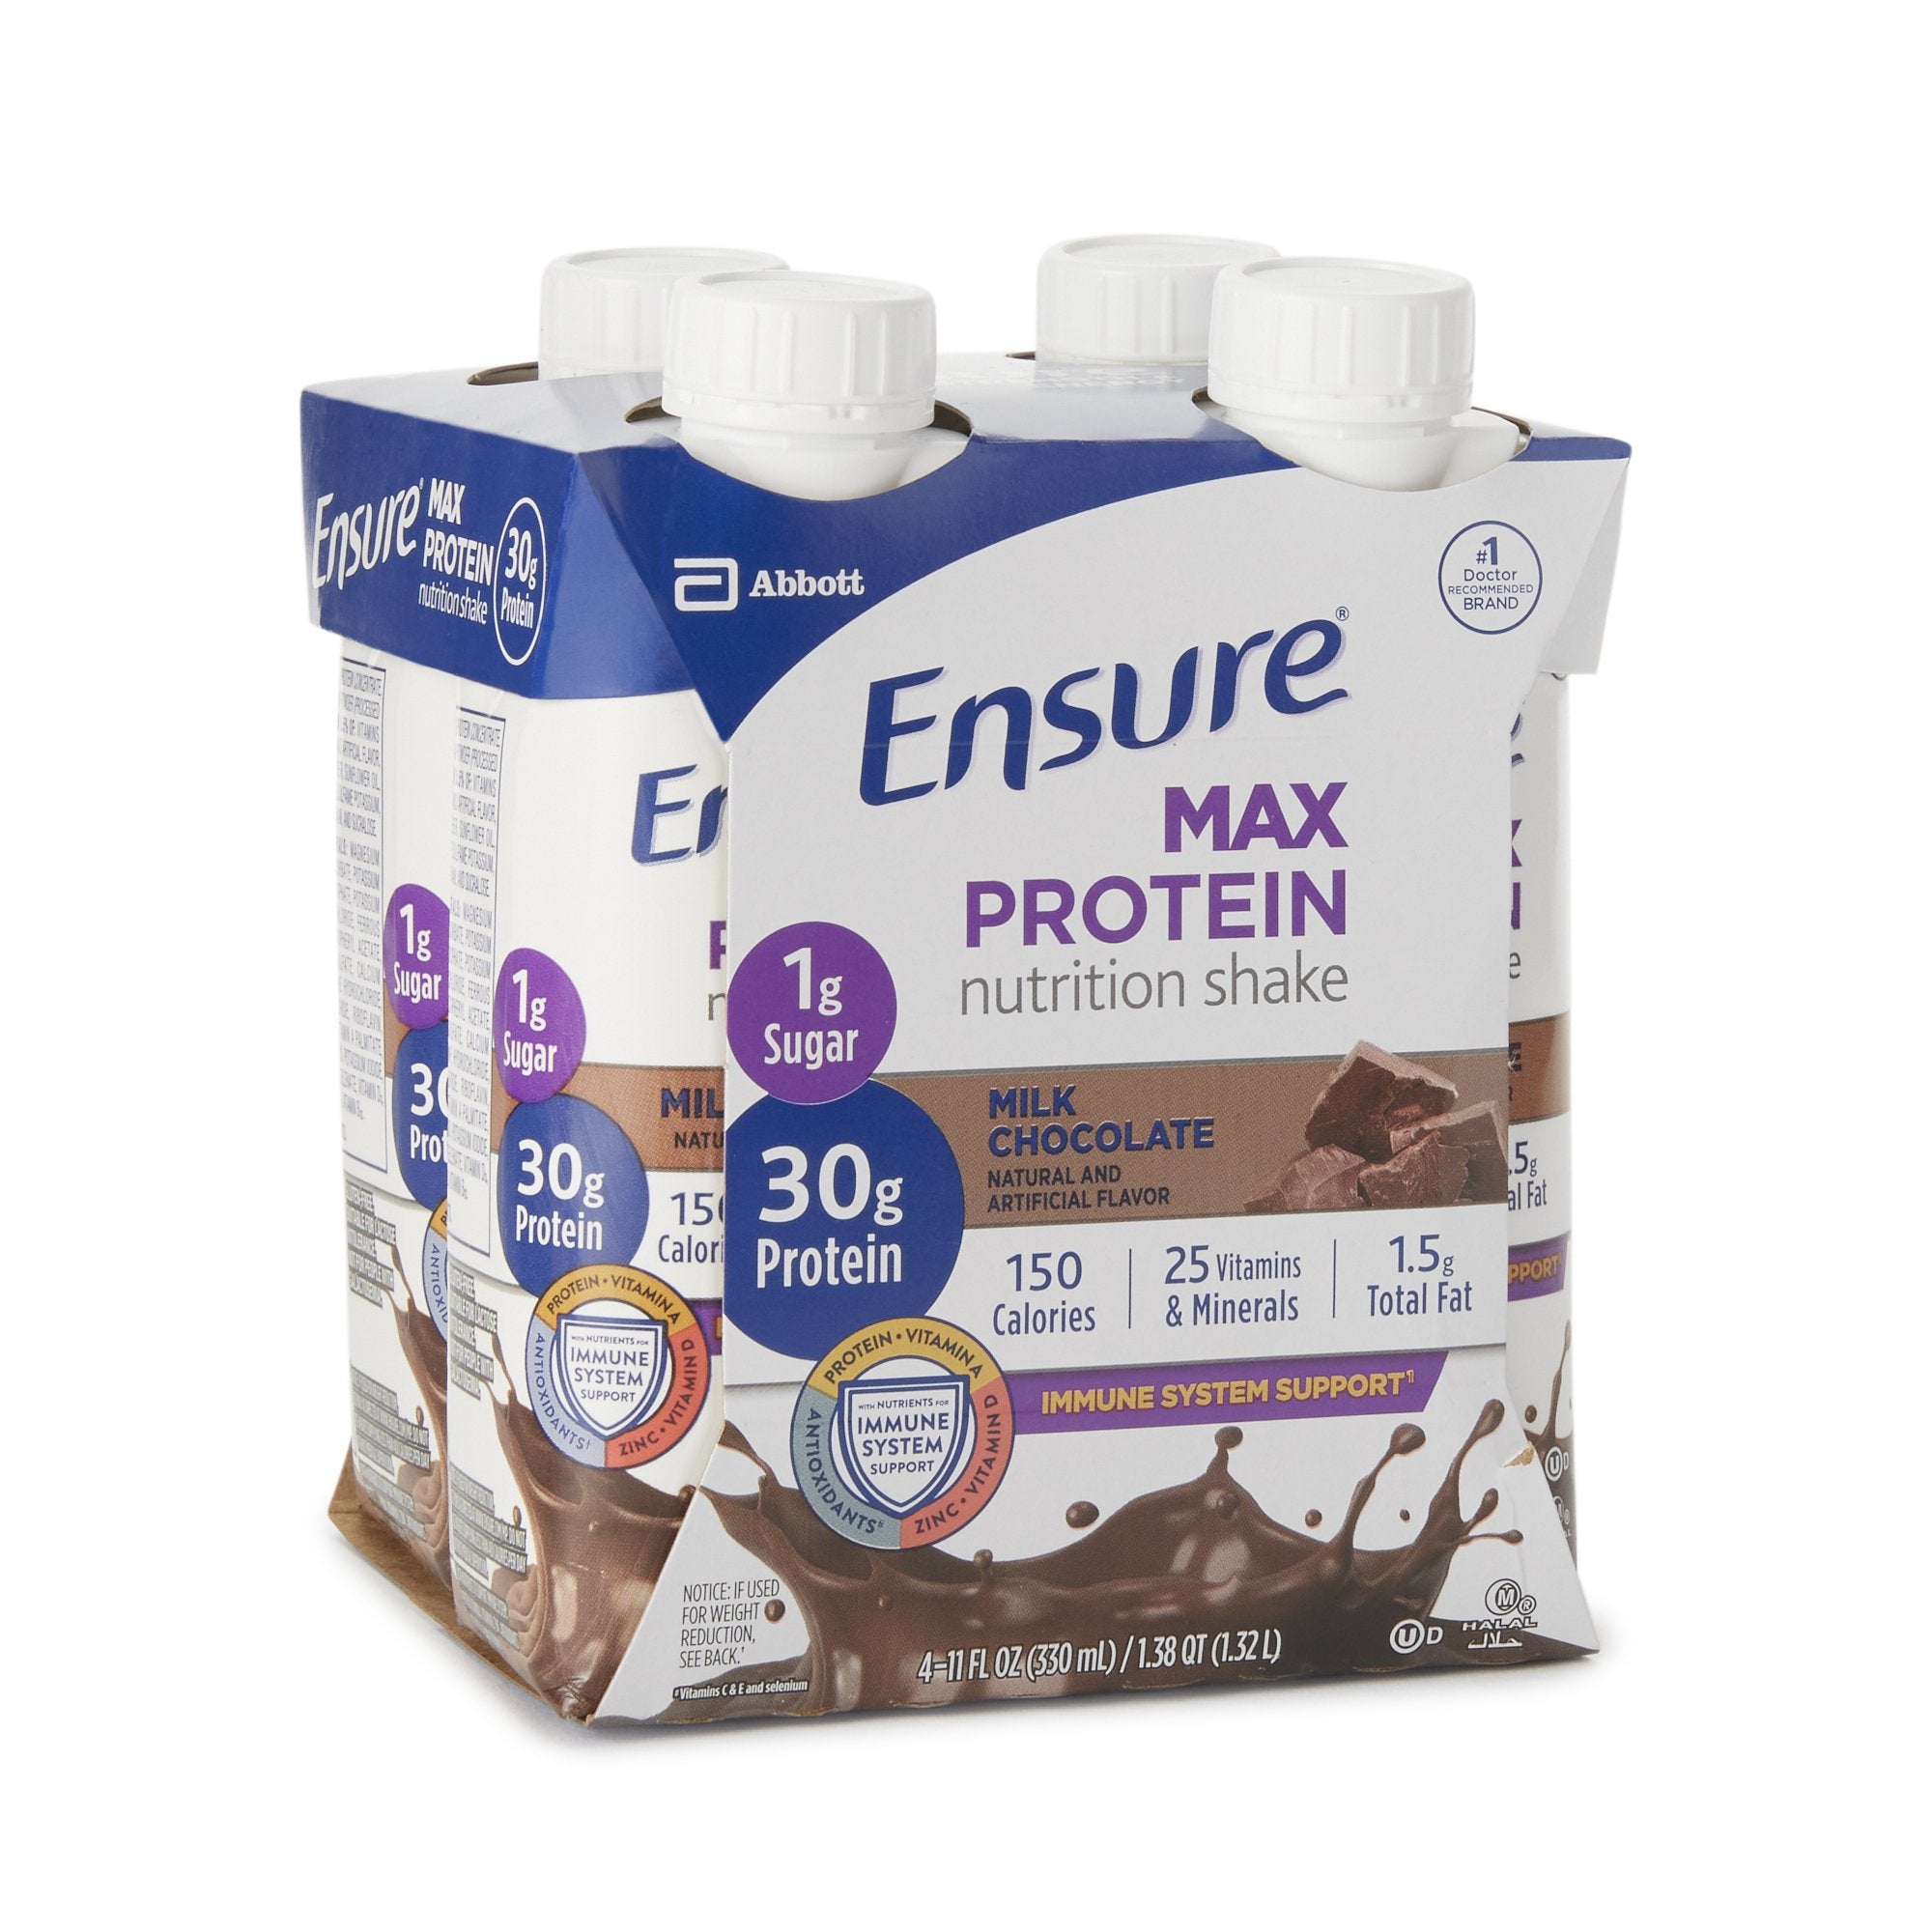 Ensure Max Protein Nutrition Shake, Milk Chocolate, 11oz - Muscle Health Support